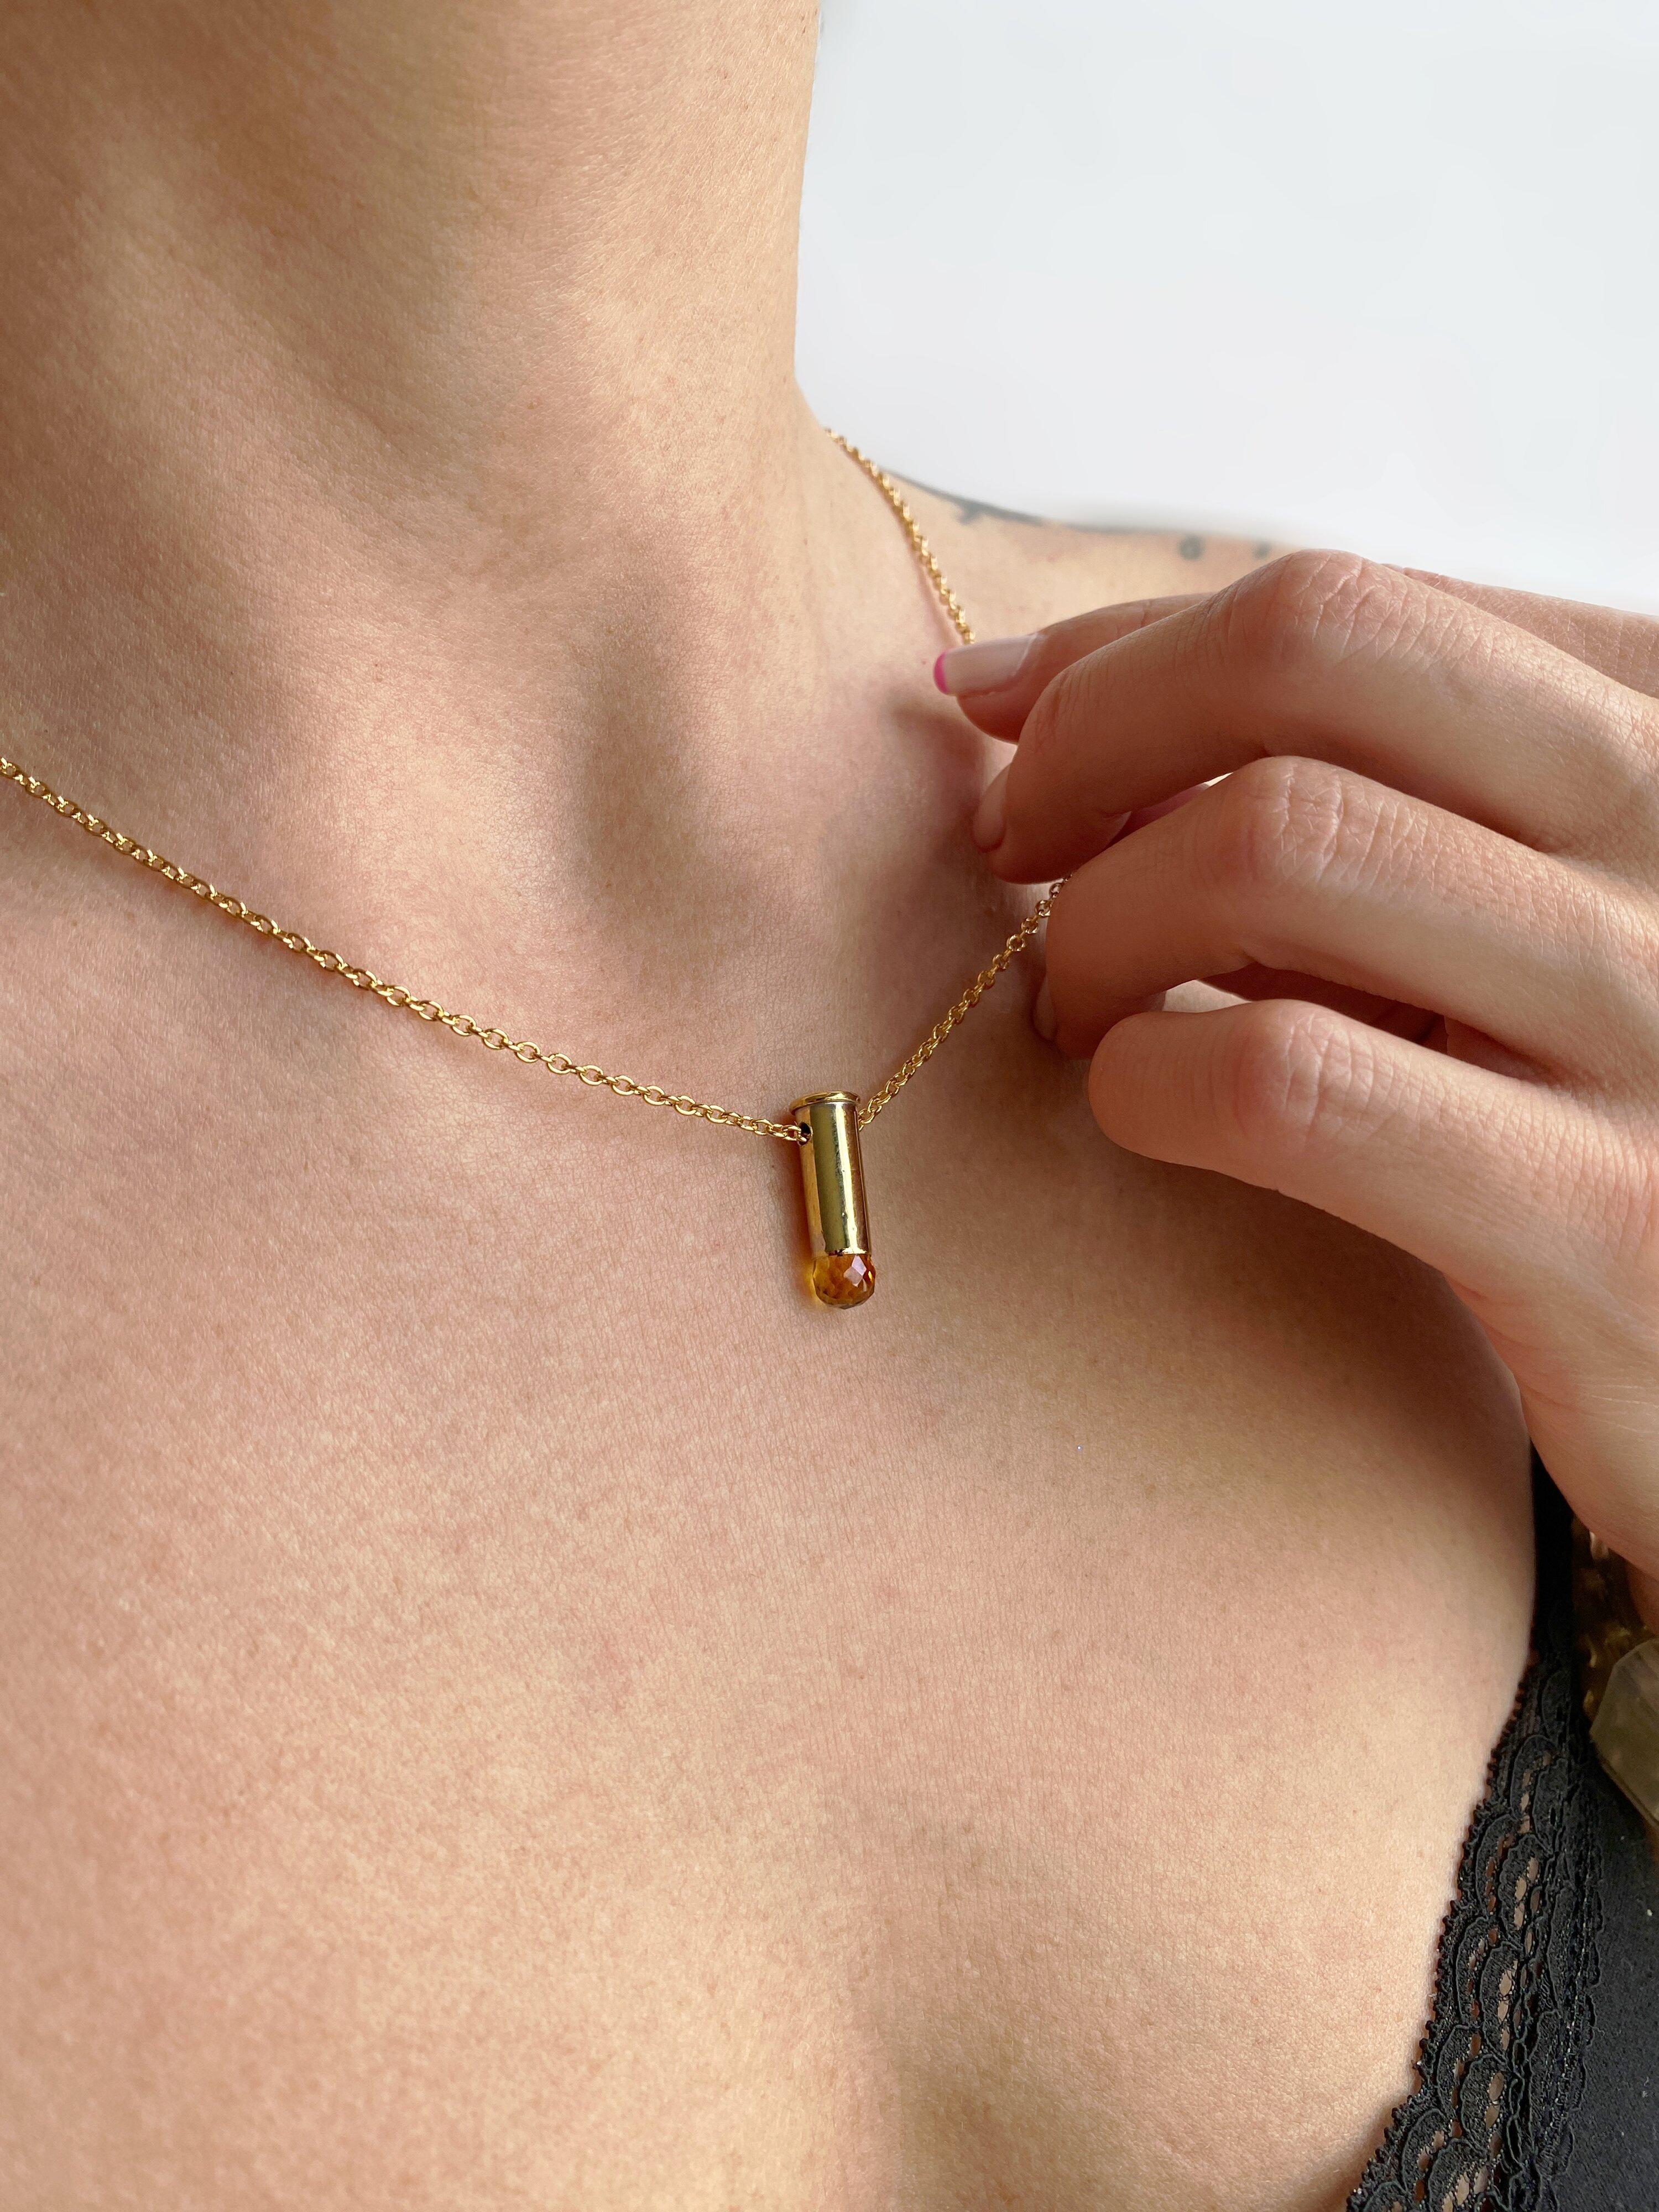 This captivating necklace features a 22 caliber gold filled bullet casket set with a natural Citrine briolette. This piece is from the “Peace” collection by Sebastian Jaramillo, commemorating the signing of peace between the Colombian guerrillas and